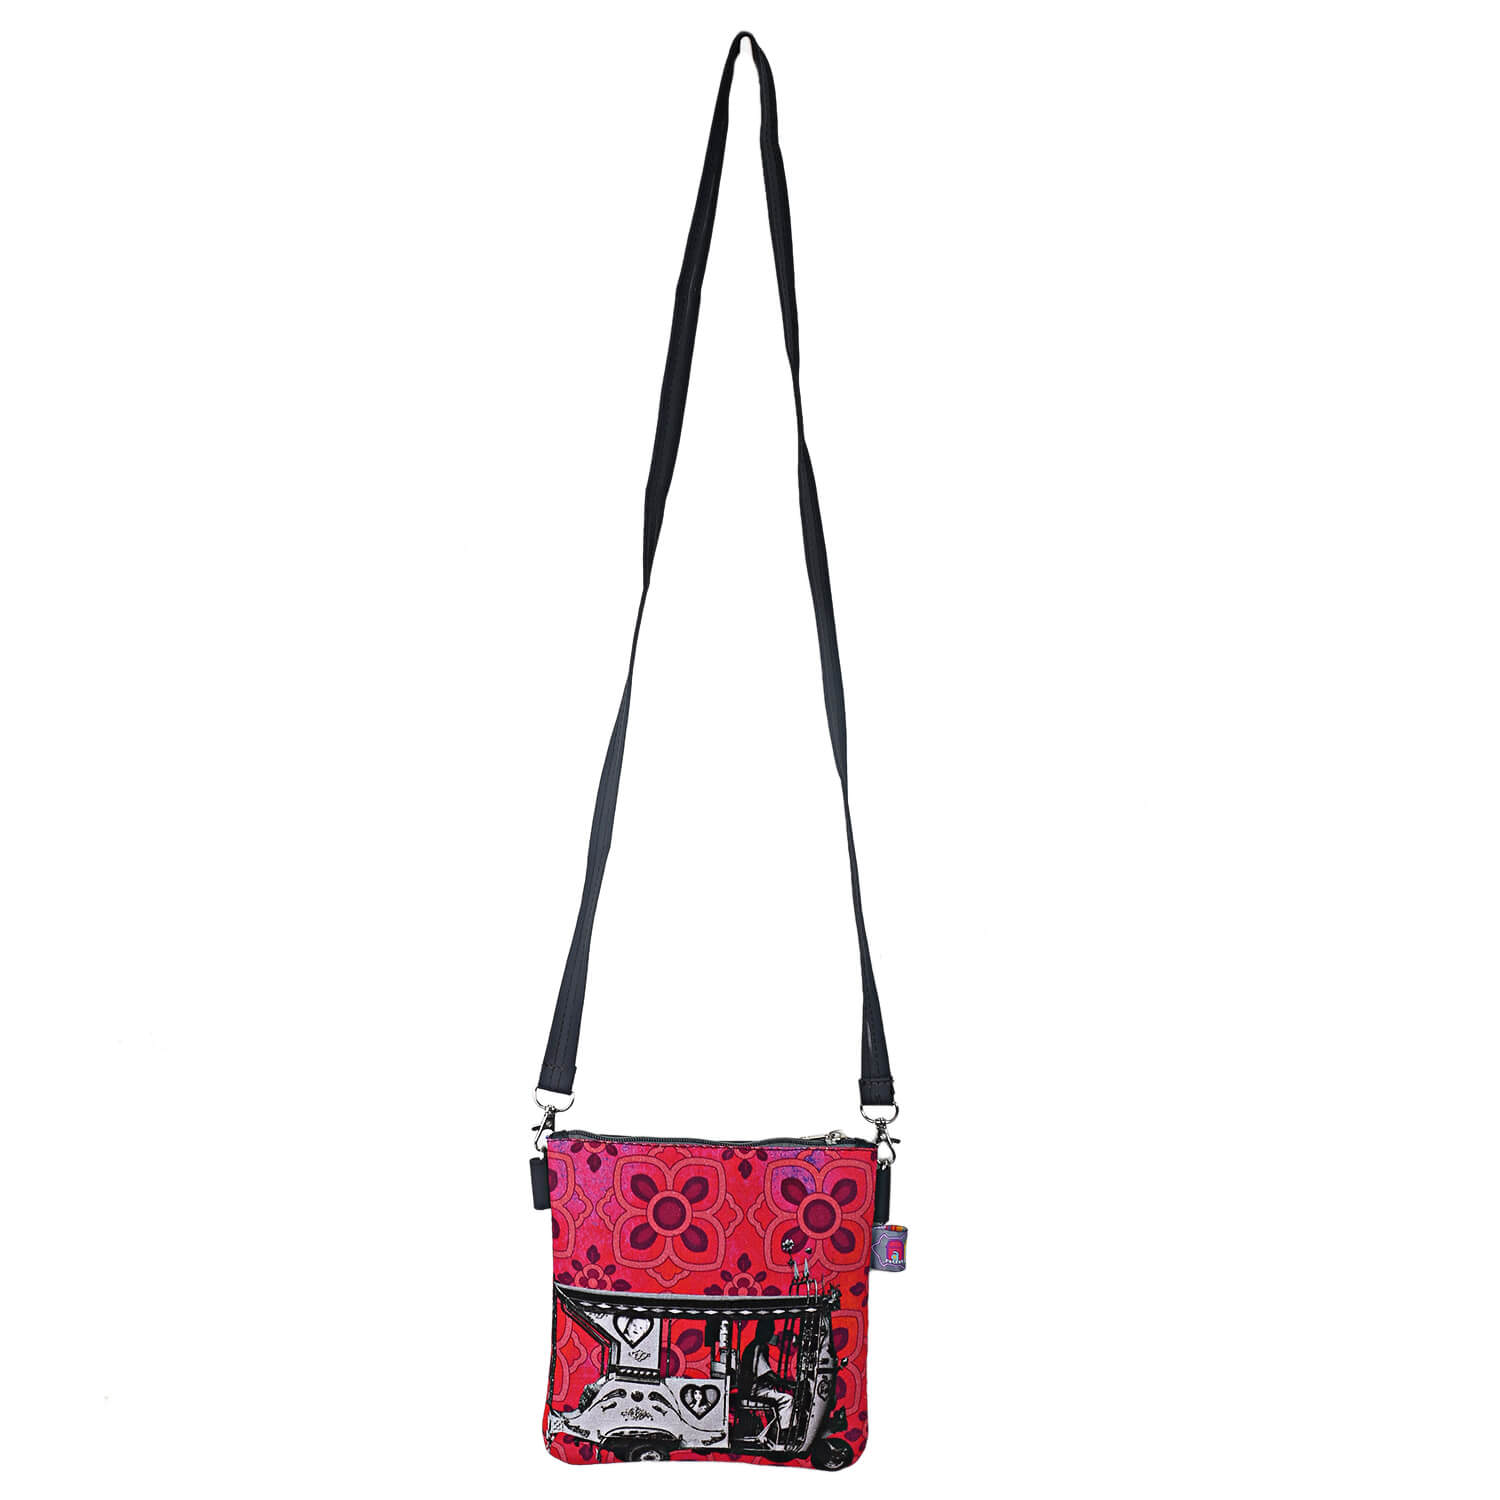 Quirky Sling Bag Fdtsb001 Other4